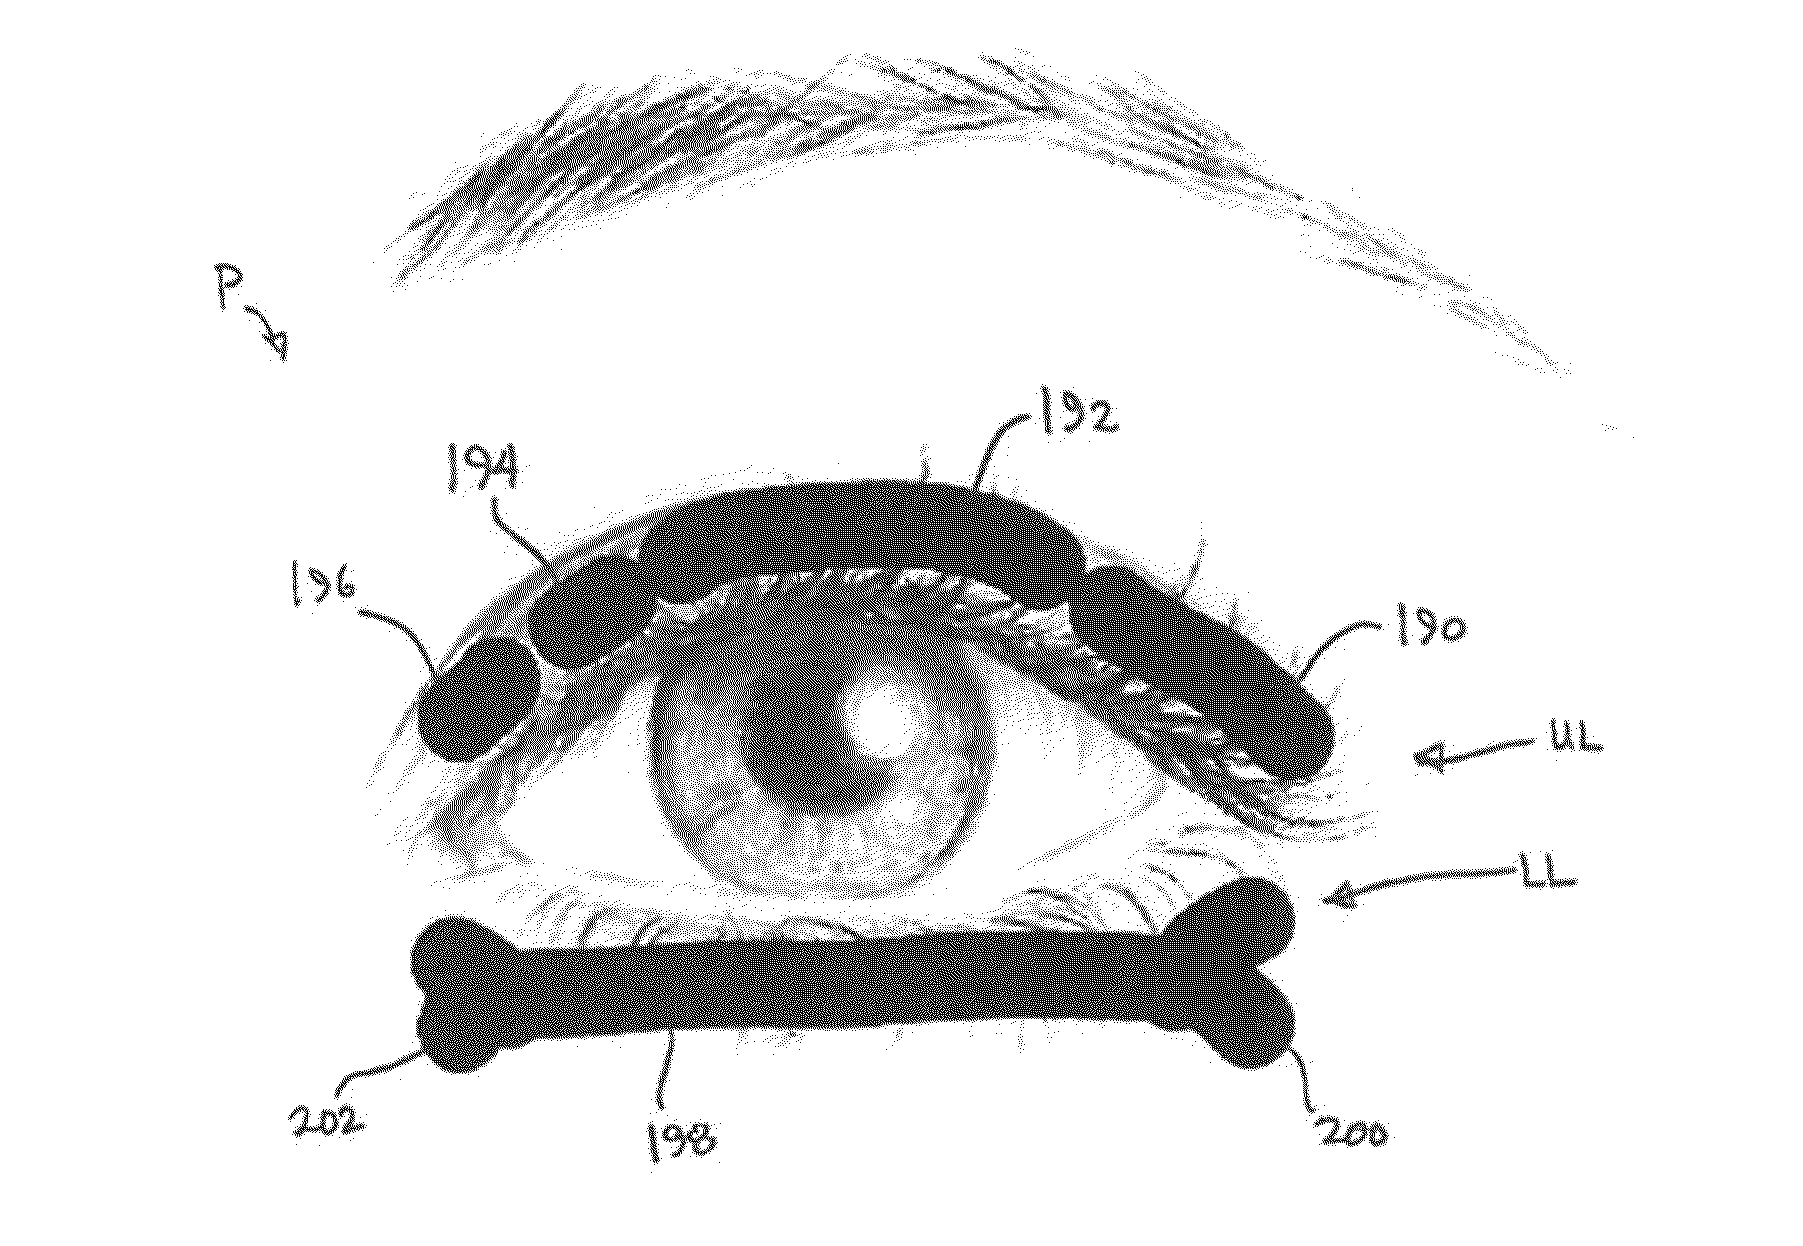 Dry eye treatment apparatus and methods